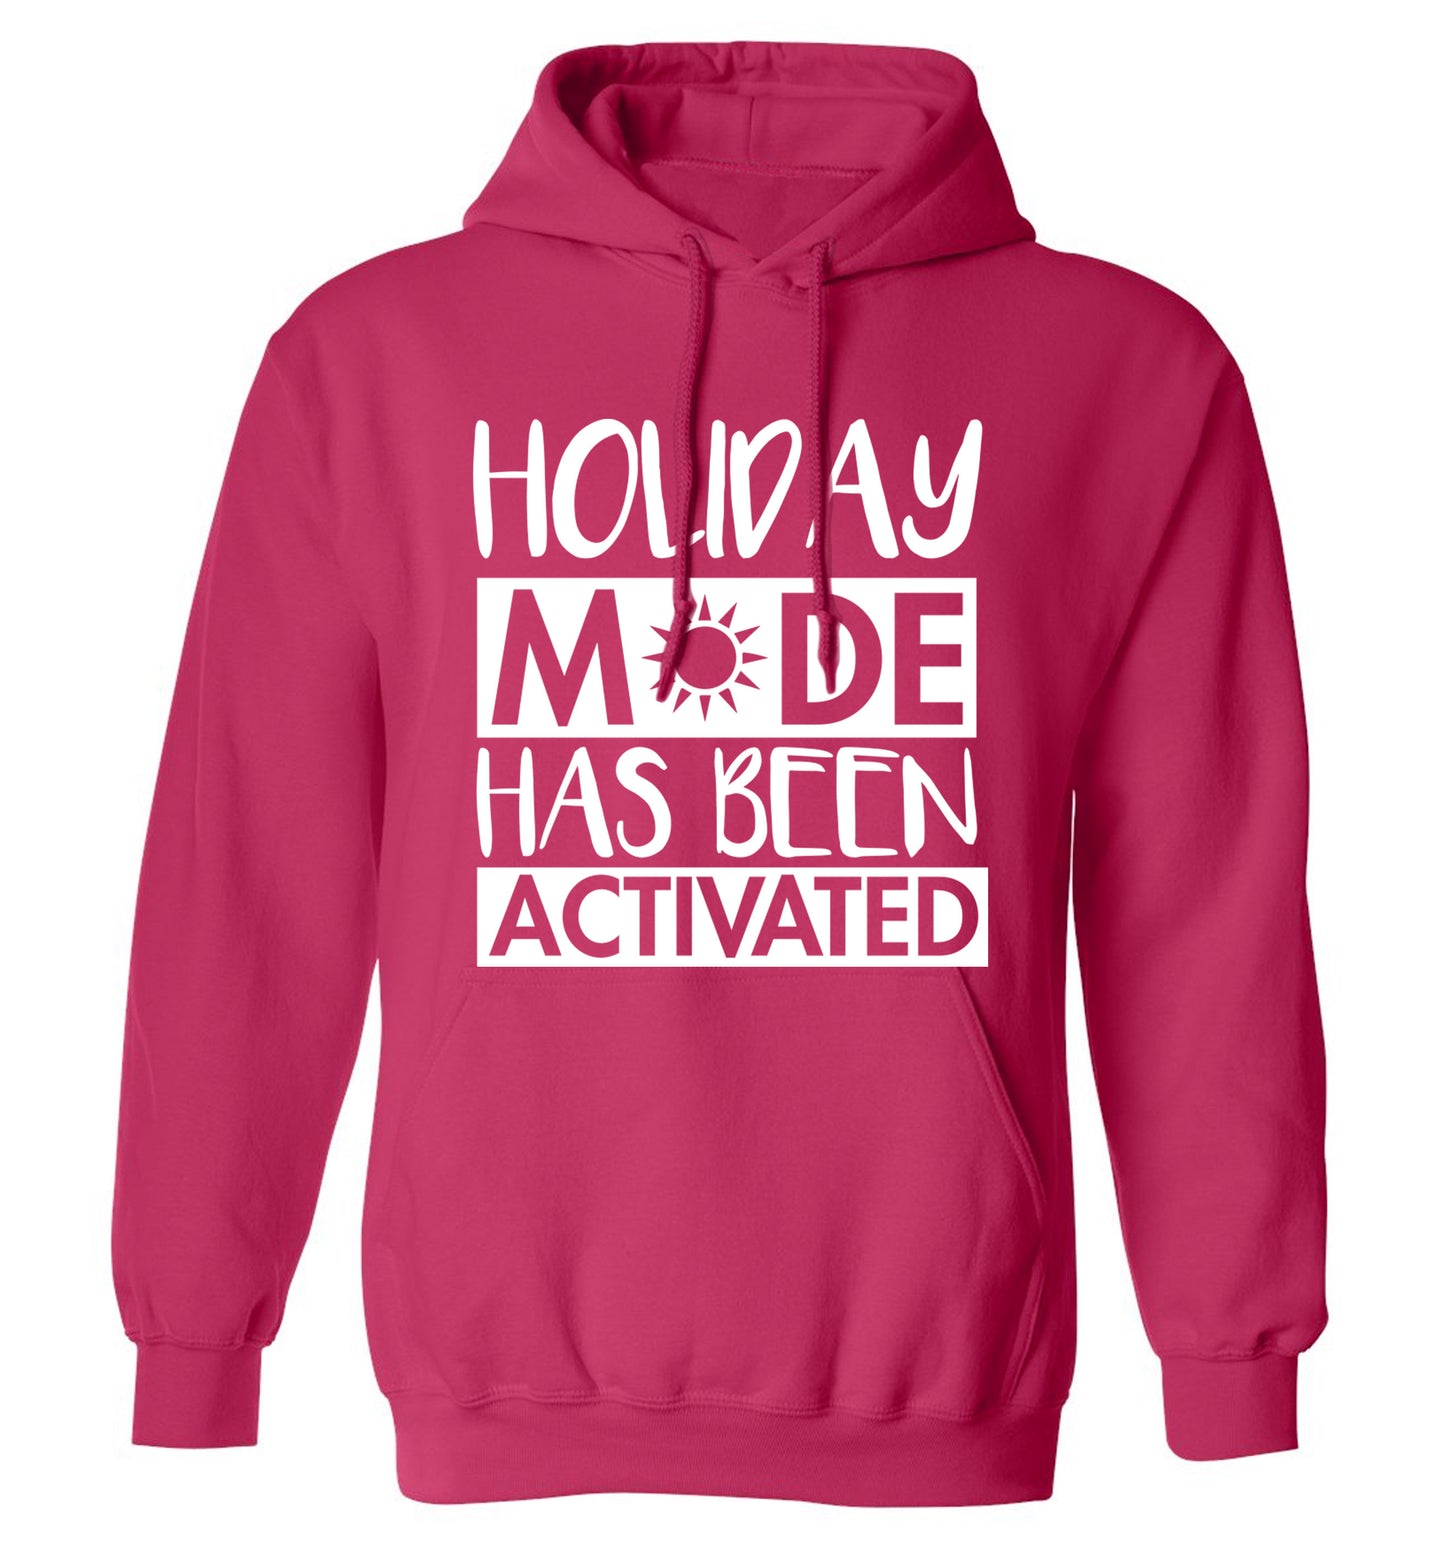 Holiday mode has been activated adults unisex pink hoodie 2XL